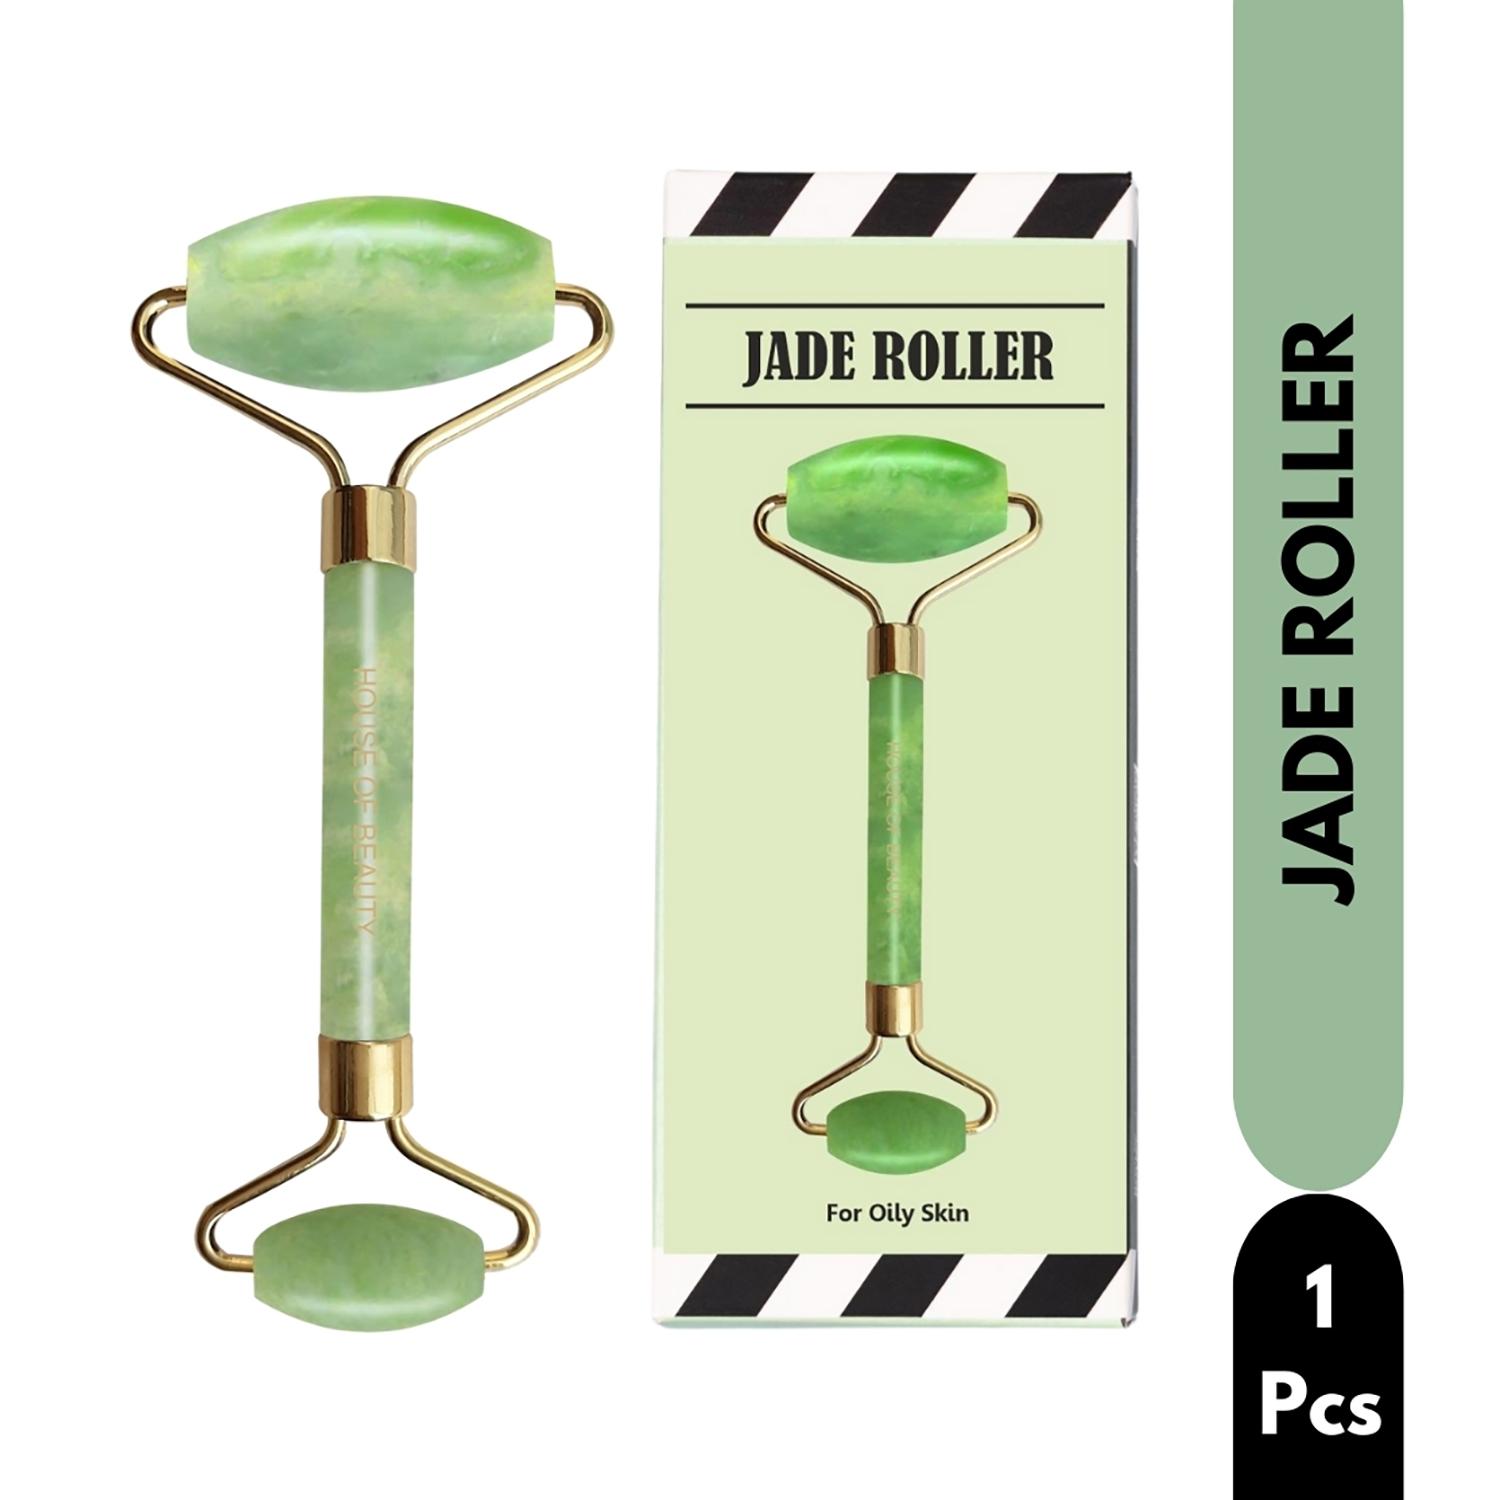 House of Beauty | House of Beauty Jade Roller For Oily Skin Helps Tone, Tighten, Depuff Face & Under Eyes (1 Pc)